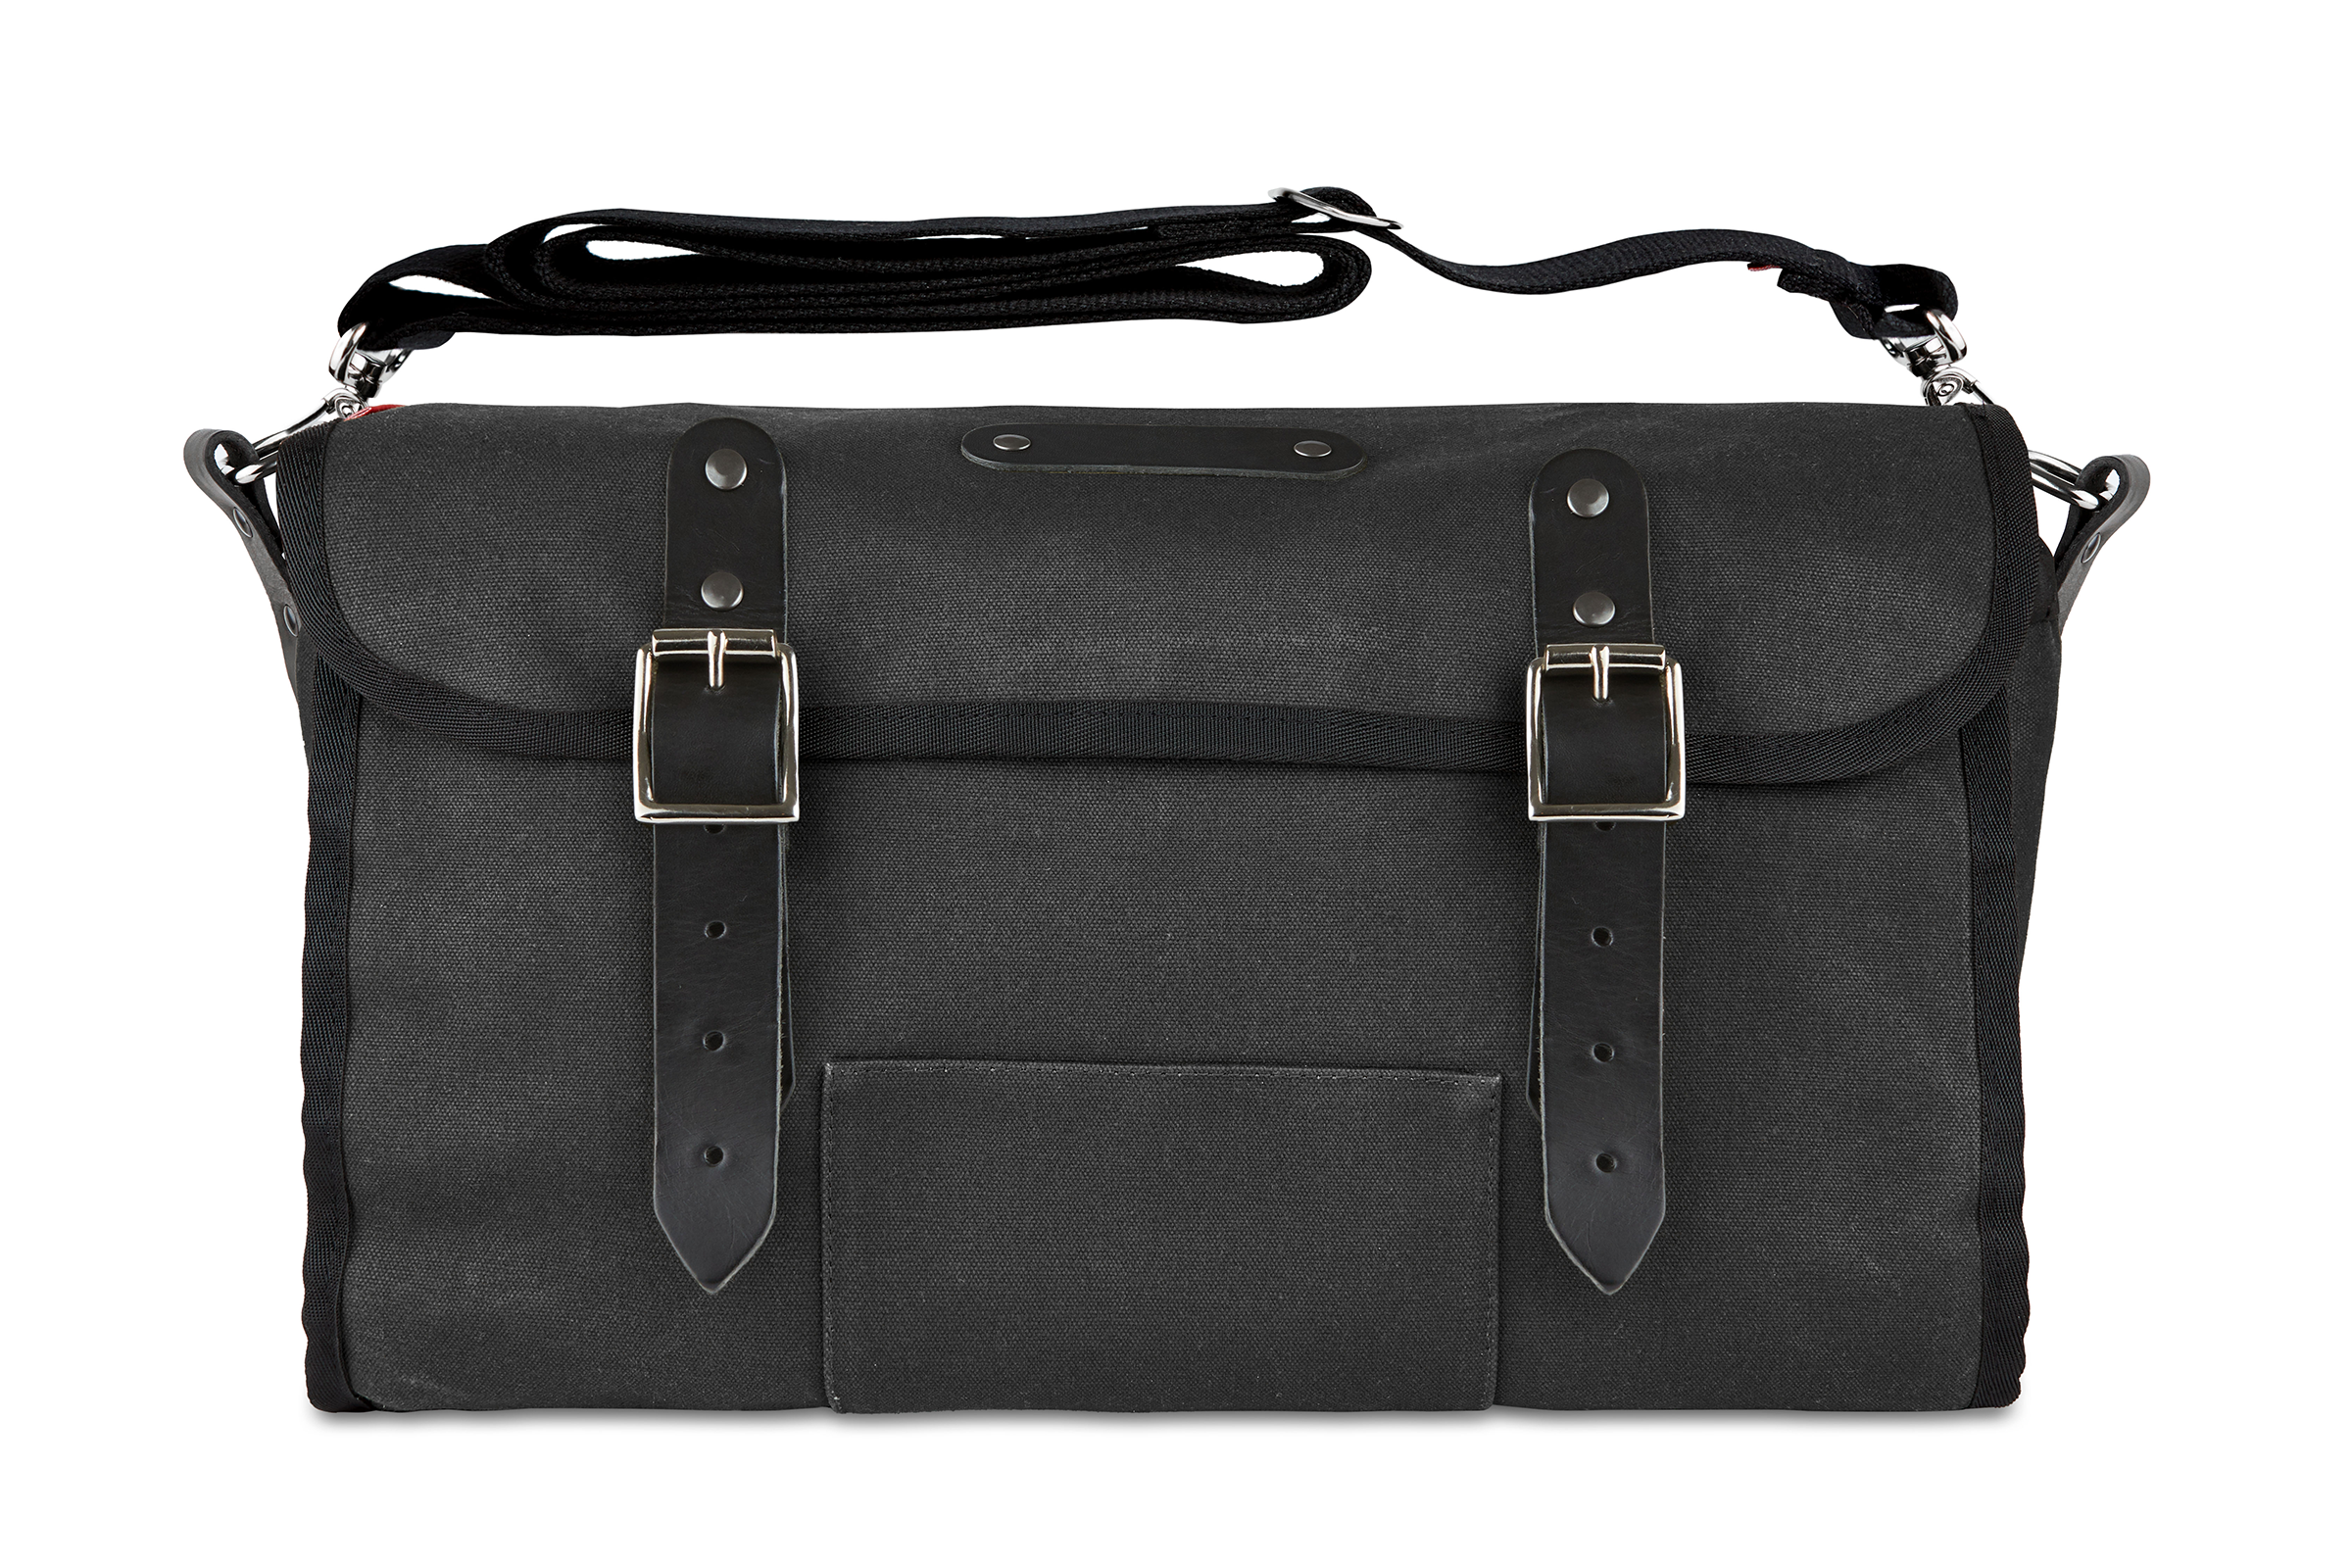 Frost and Sekers Otis saddle bag. Black canvas with Black leather.